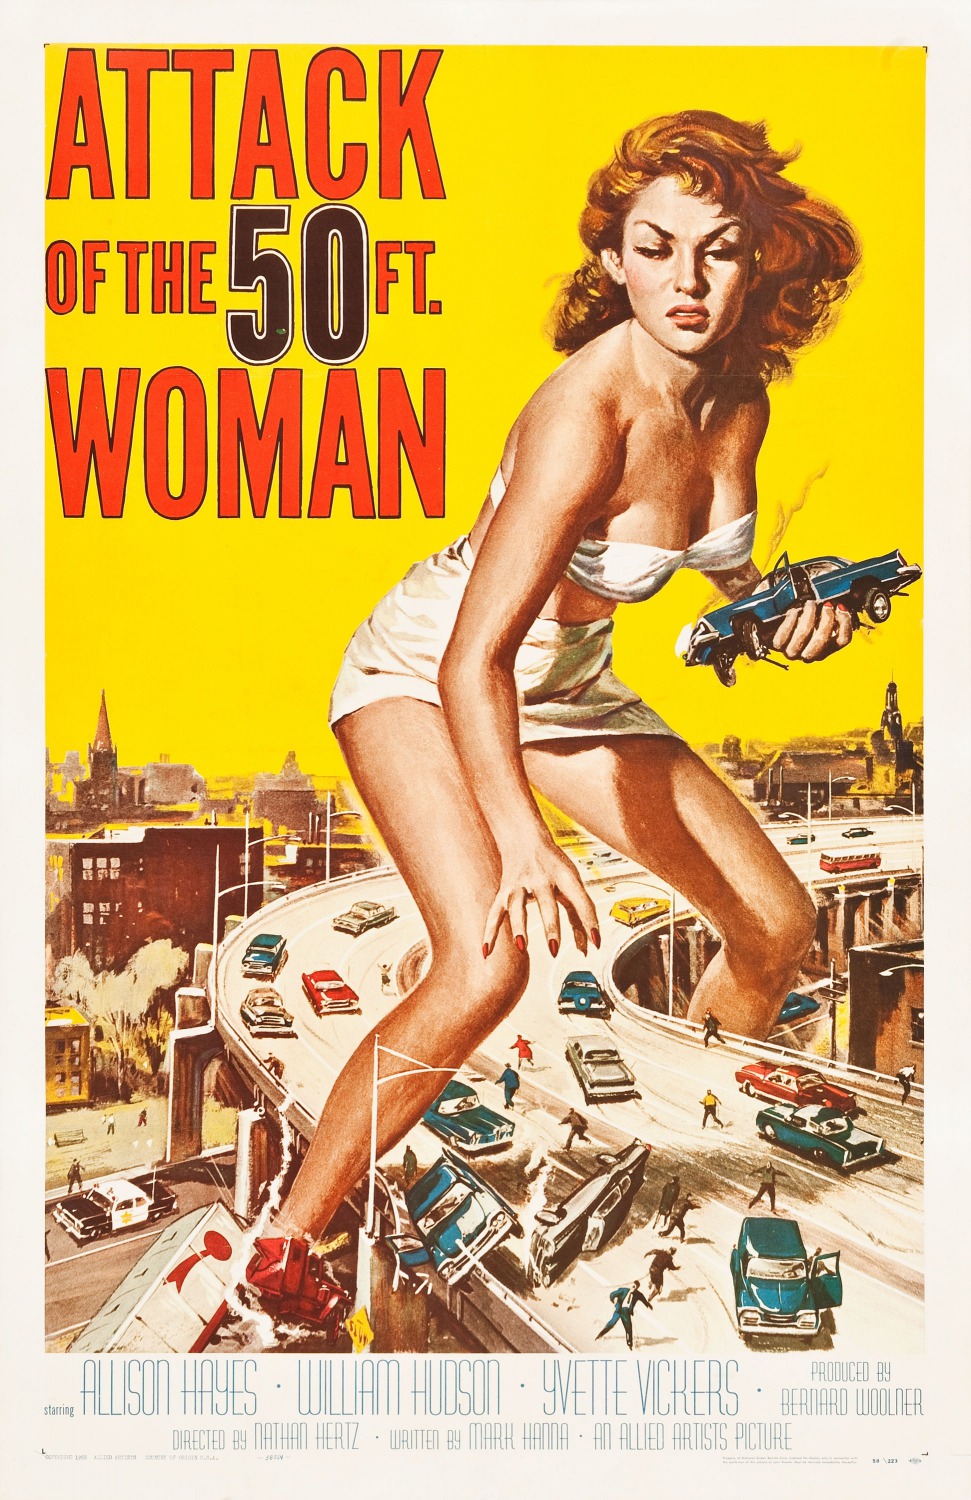 Extra Large Movie Poster Image for Attack of the 50 Foot Woman 